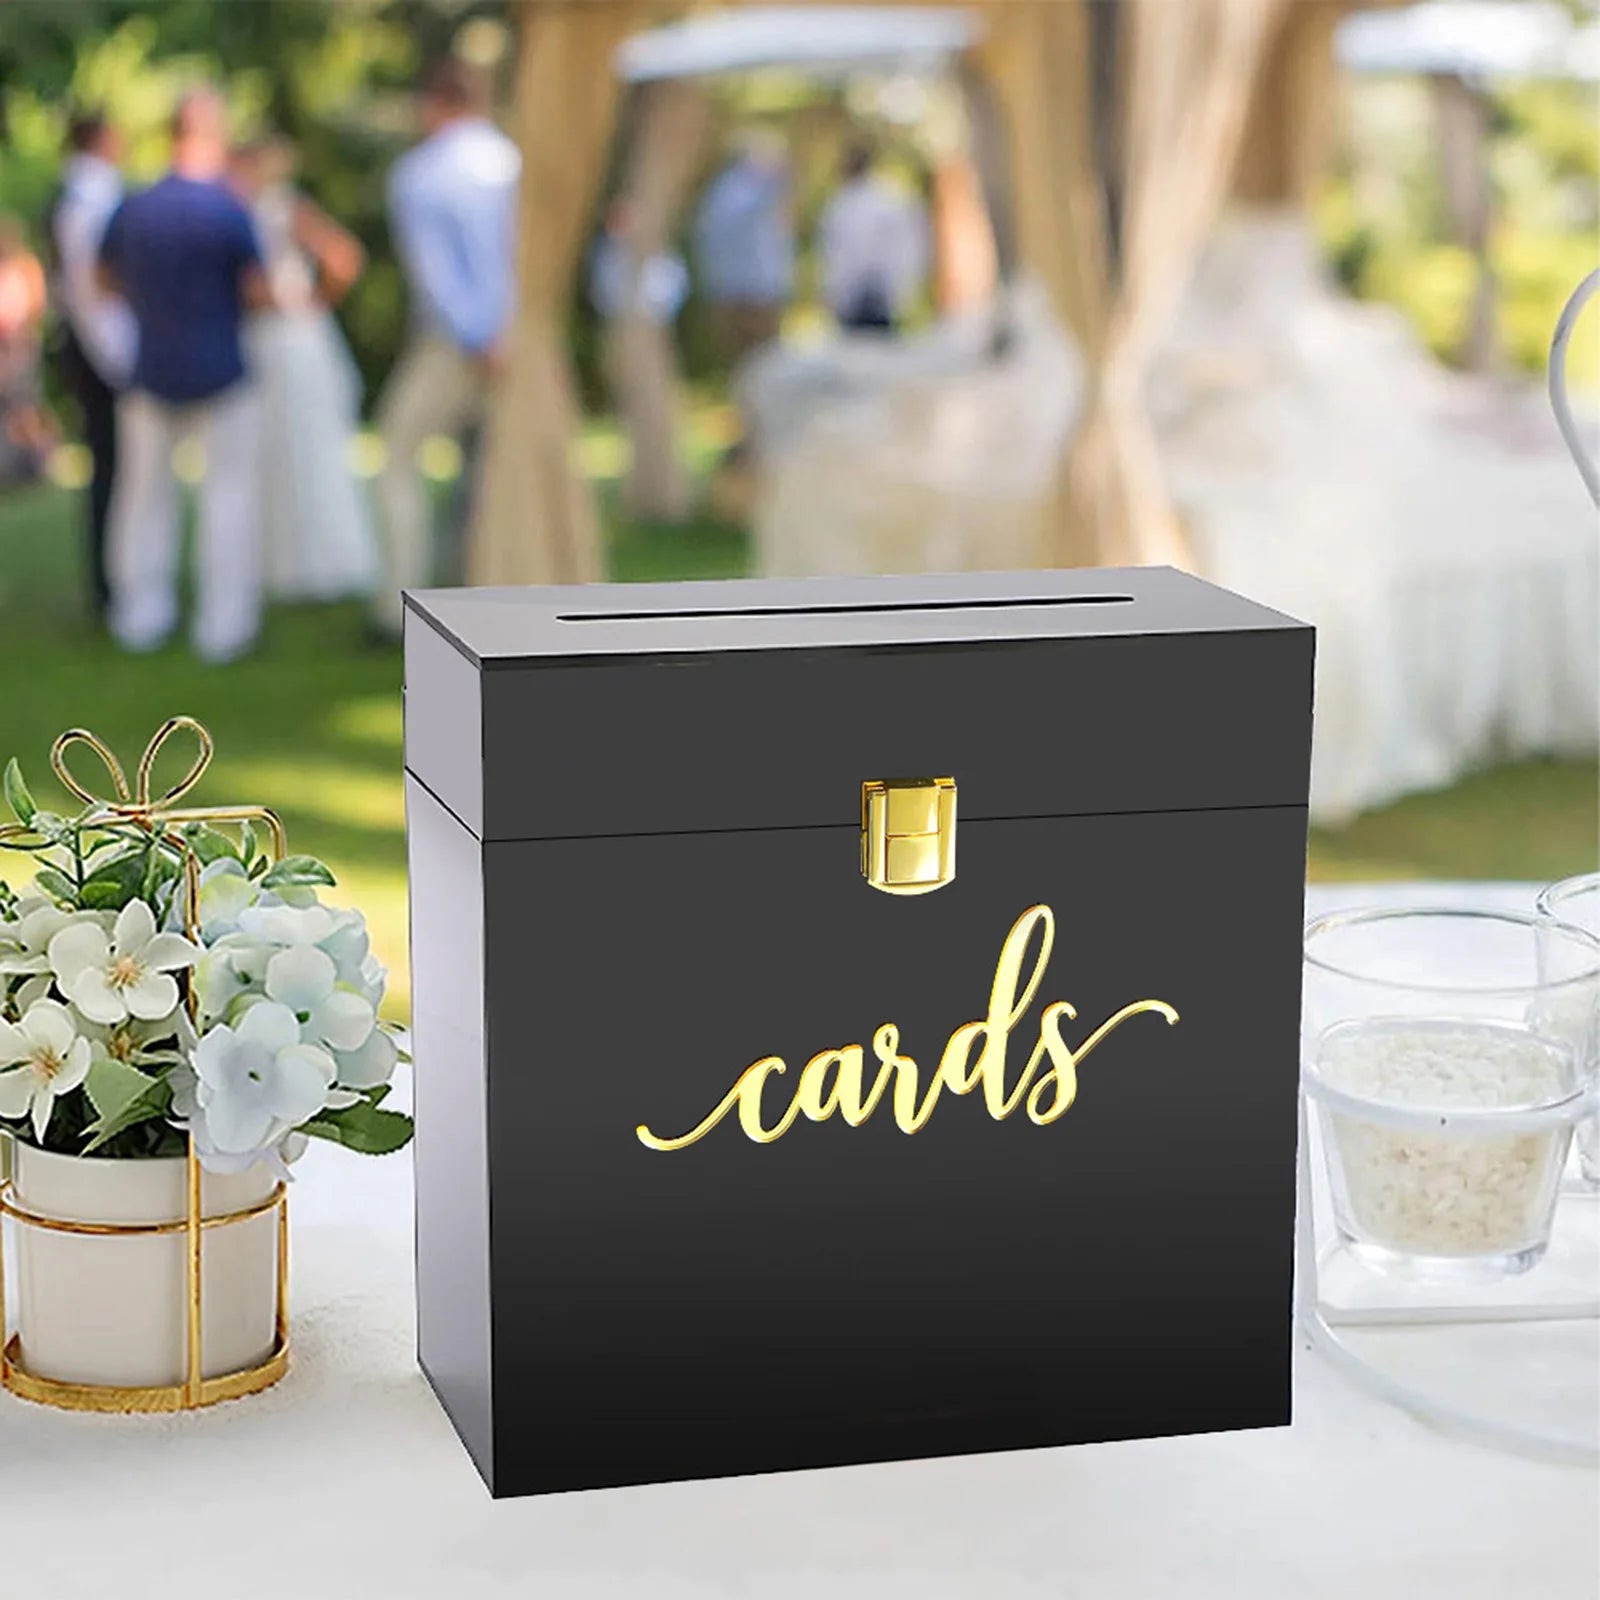 Where to buy acrylic card boxes